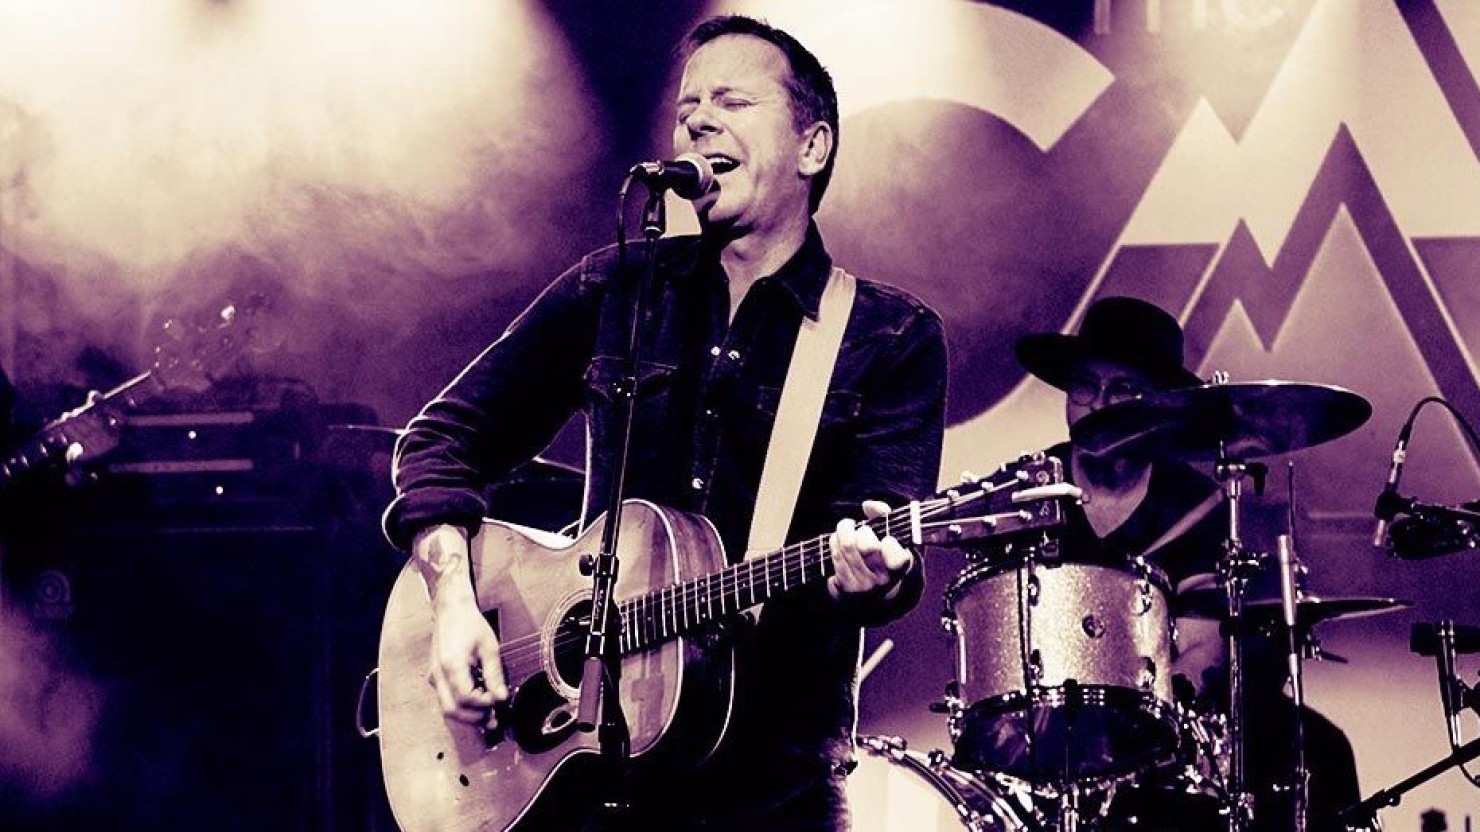 The Kiefer Sutherland Band concert in Brighton 21 FEB 2020